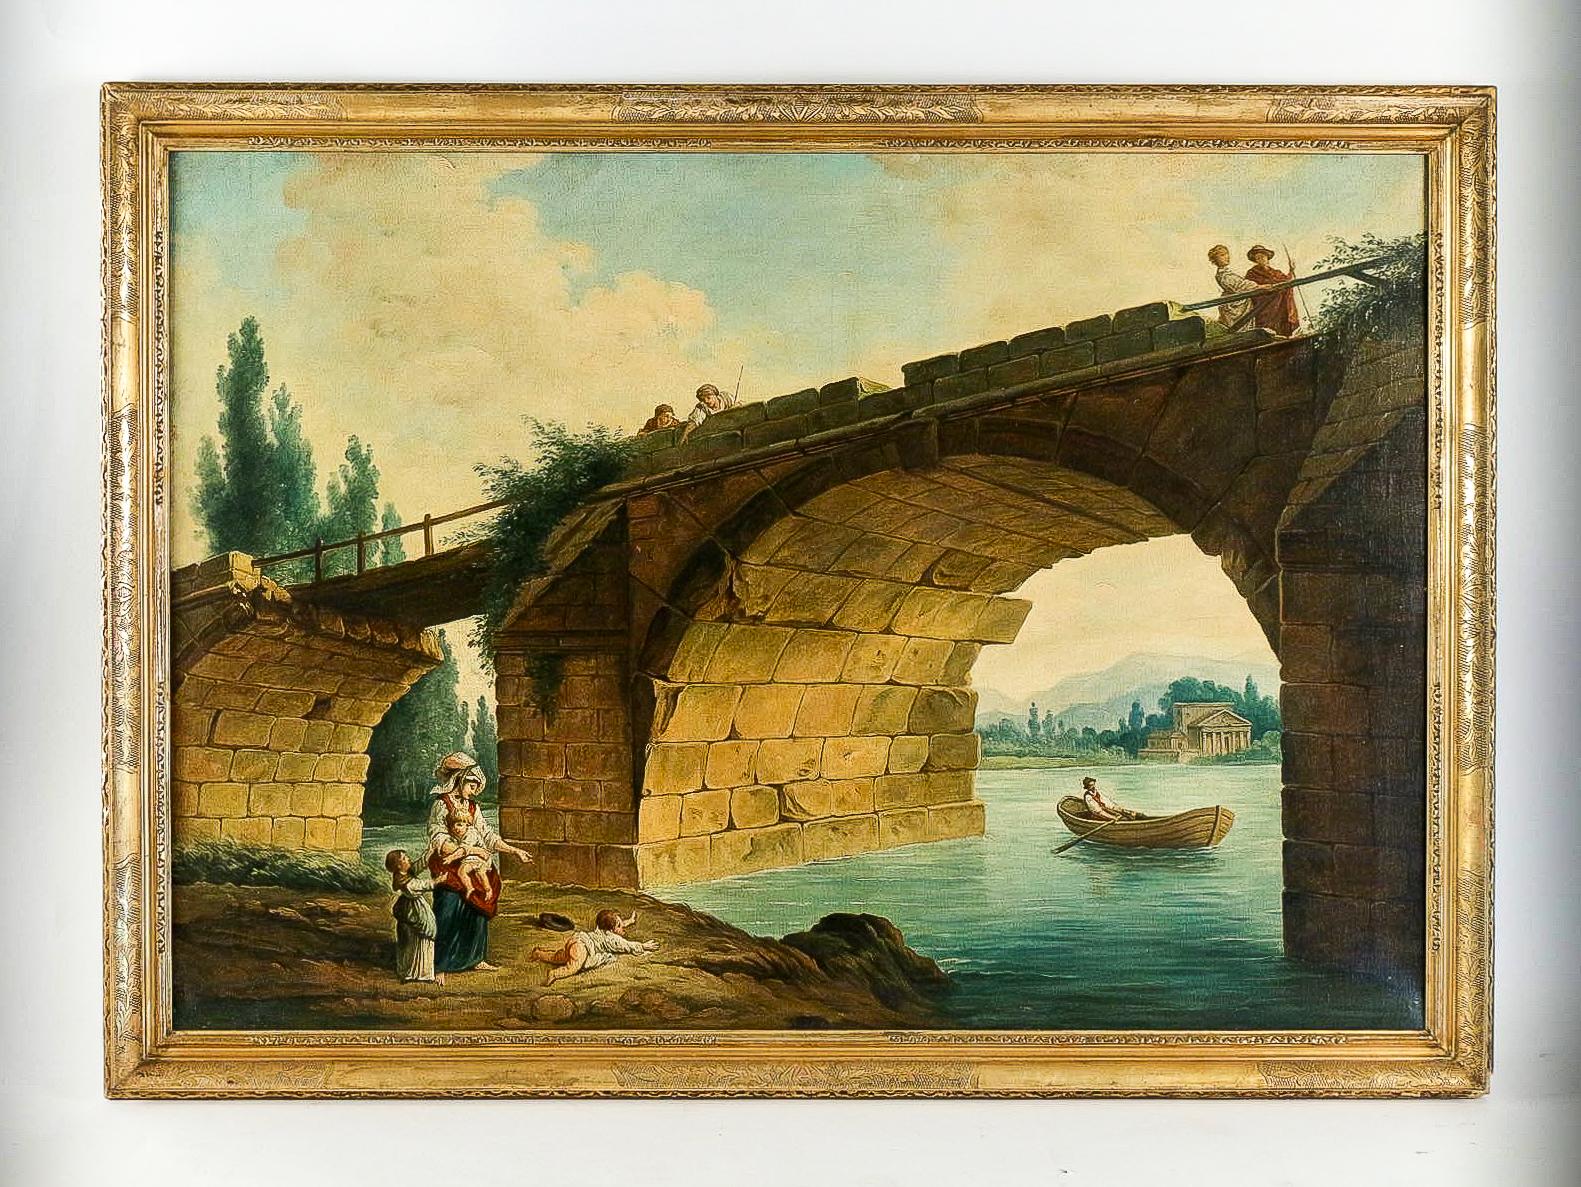 French School, The Footbridge in Ruin to the manner of Hubert Robert, circa 1820

An interesting and ornamental oil on canvas, interpretation of the painting 